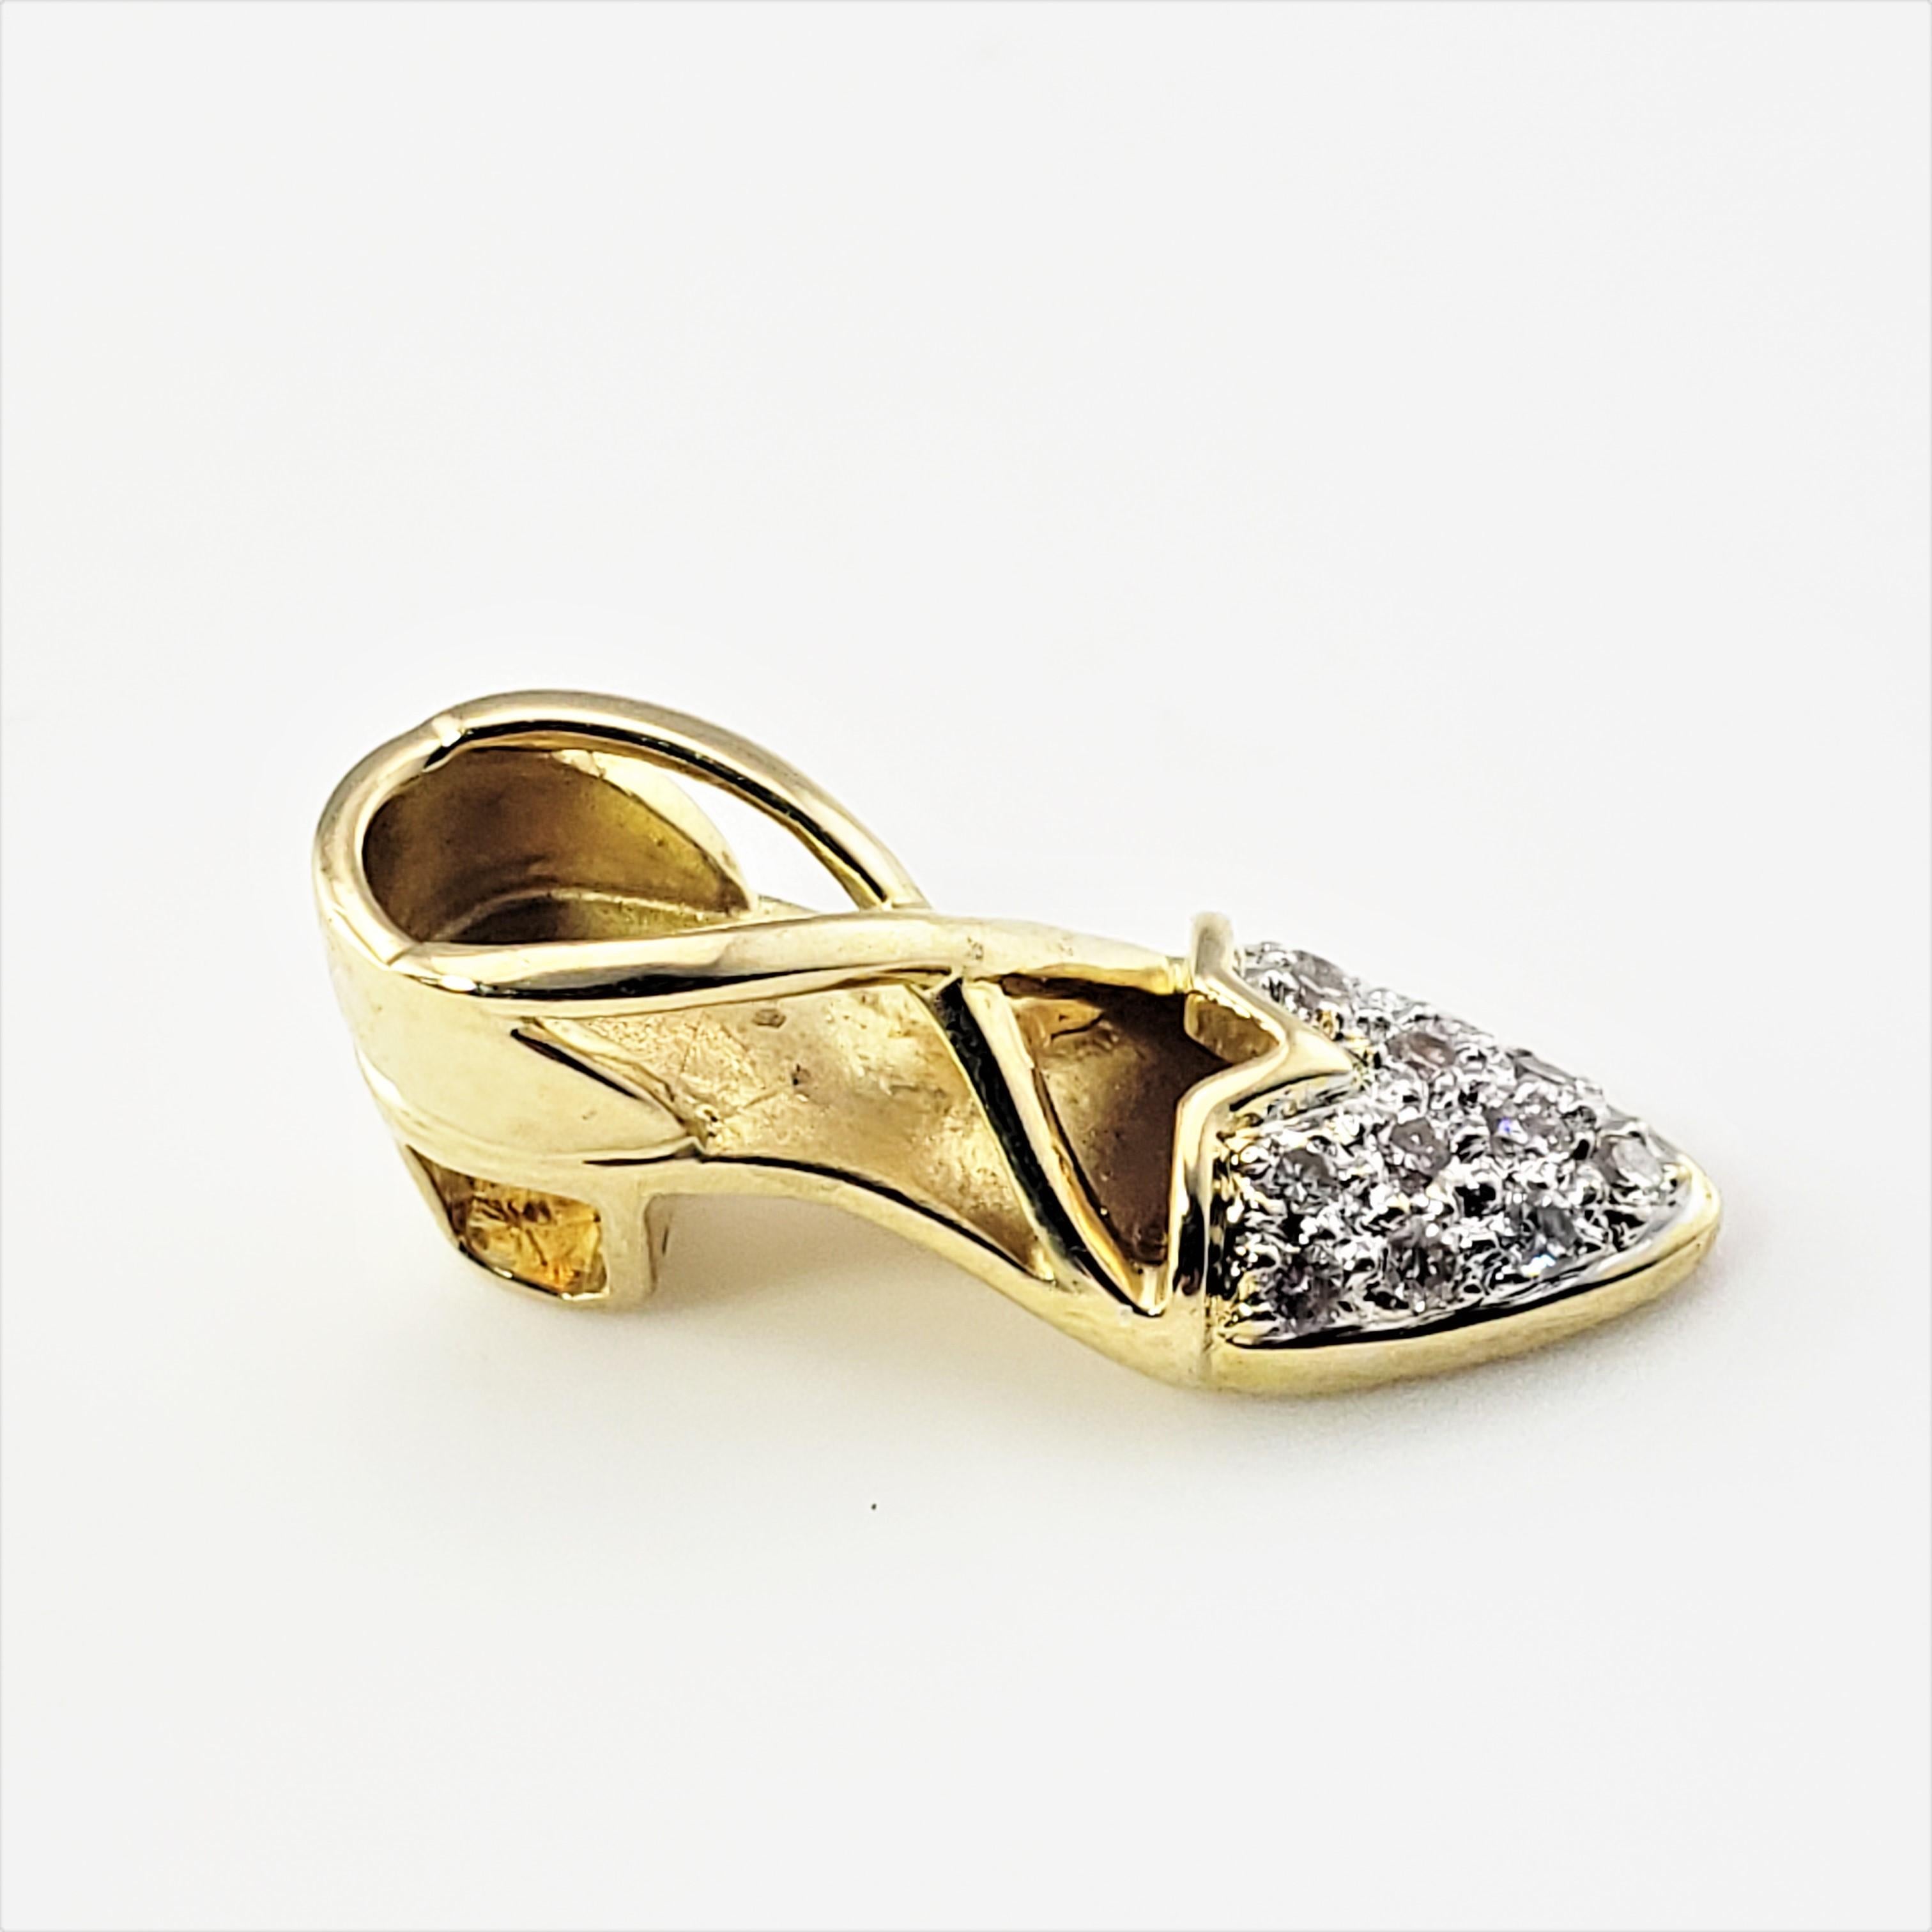 18  Karat Yellow Gold and Diamond High Heel Shoe Charm-

Perfect shoe for a night on the town!

This lovely 18K yellow gold 3D charm features a miniature high-heeled shoe accented with 12 round brilliant cut diamonds.

Approximate total diamond